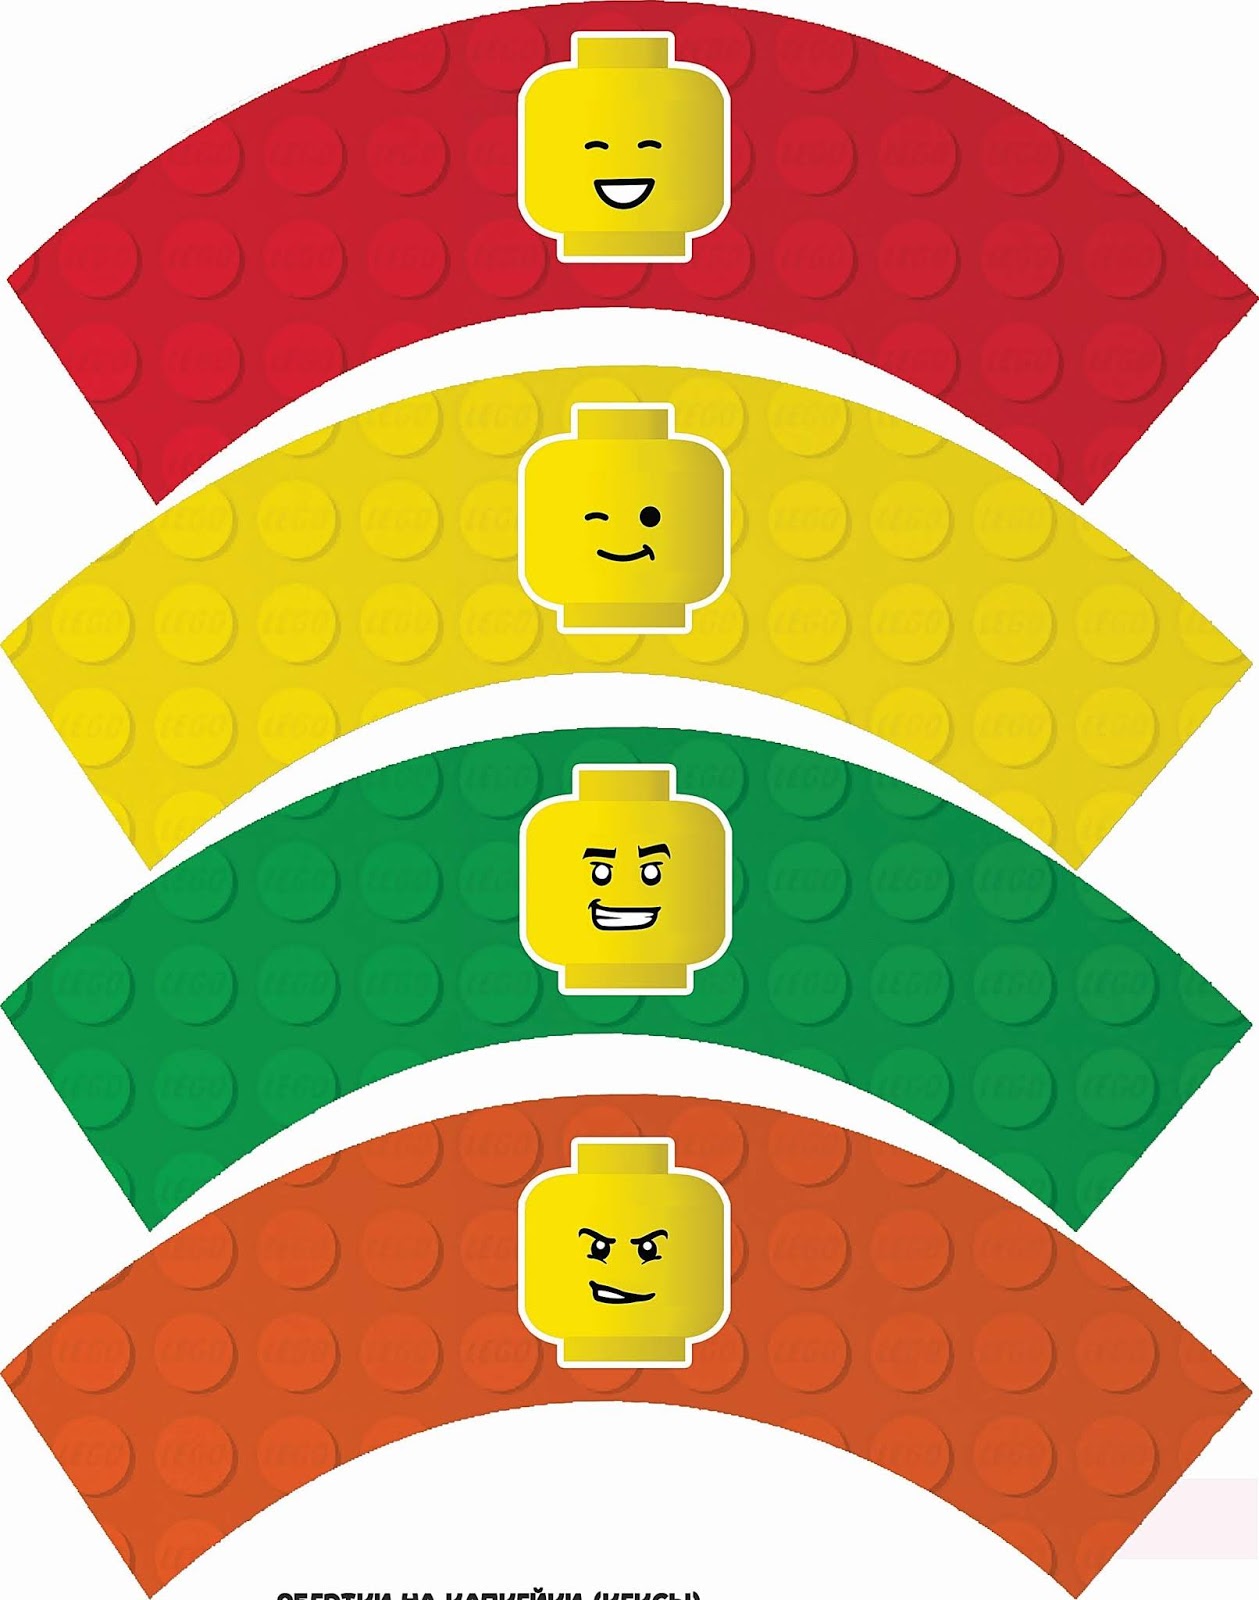 lego-party-free-printable-cupcake-wrappers-and-toppers-oh-my-fiesta